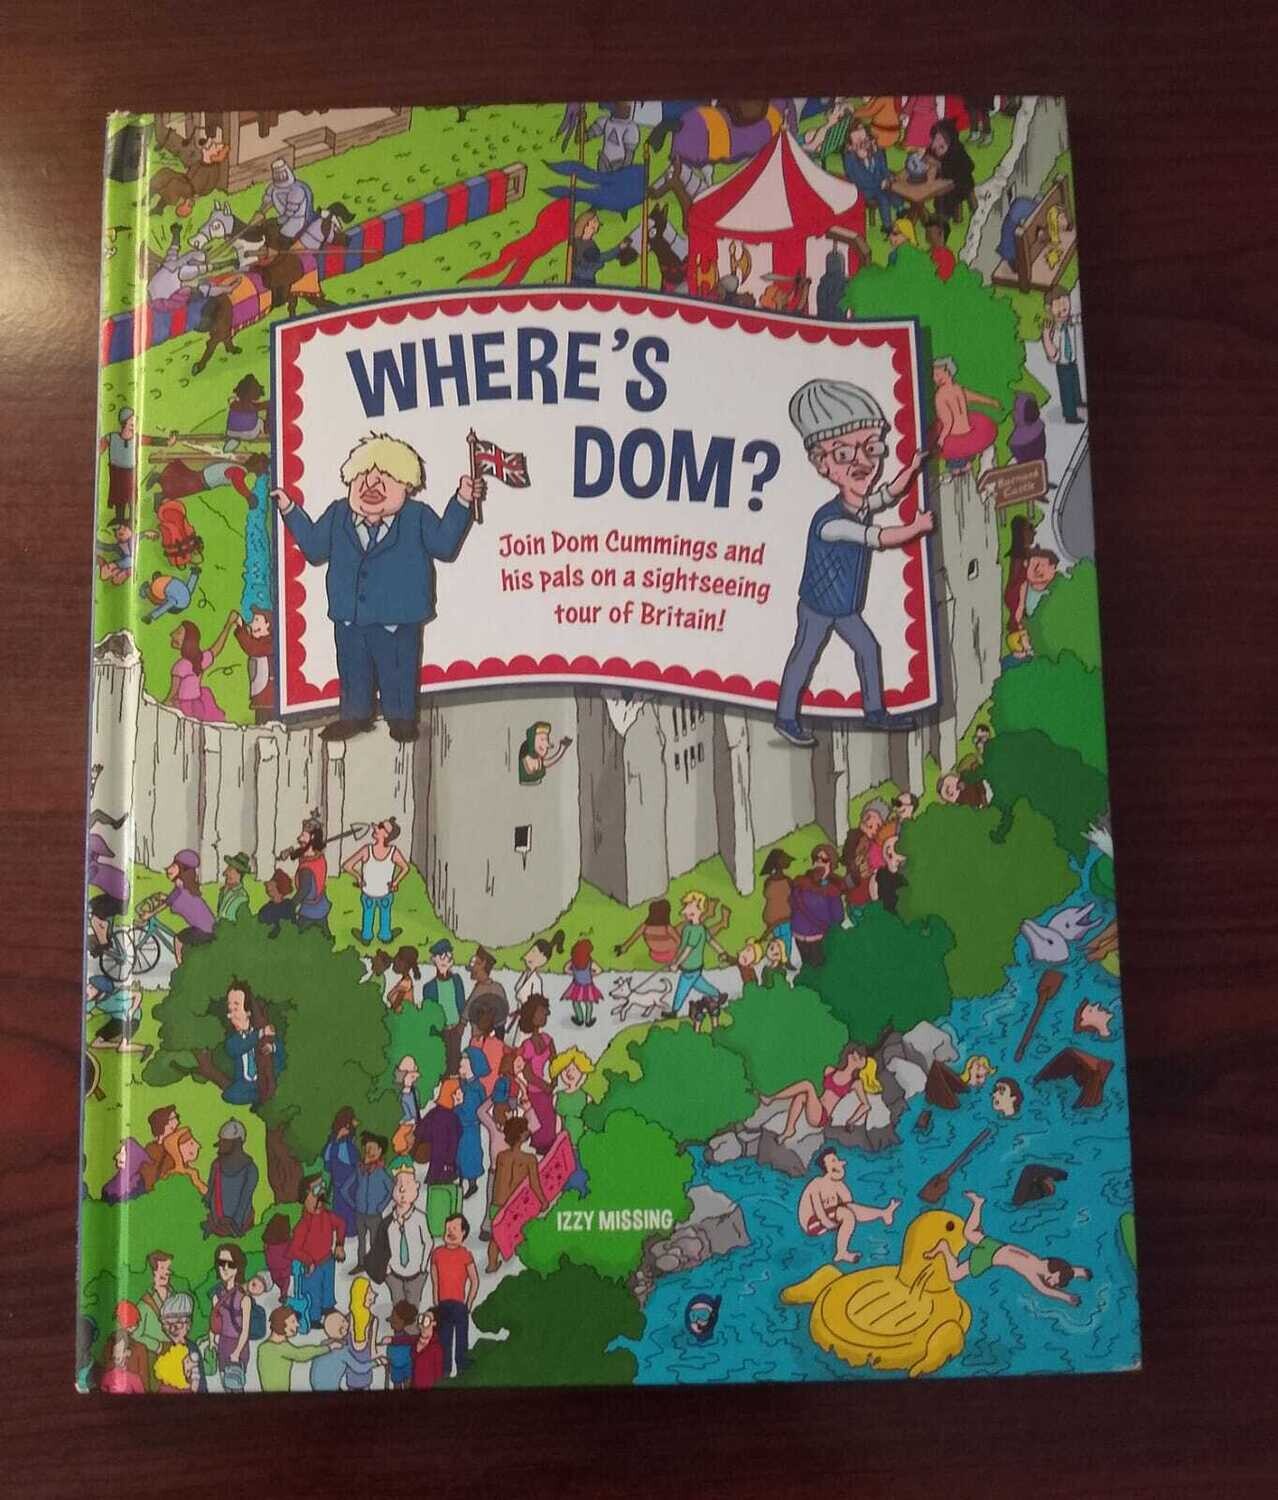 WHERE'S DOM? JOIN DOM CUMMINGS AND HIS PALS ON A SIGHTSEEING TOUR OF BRITAIN